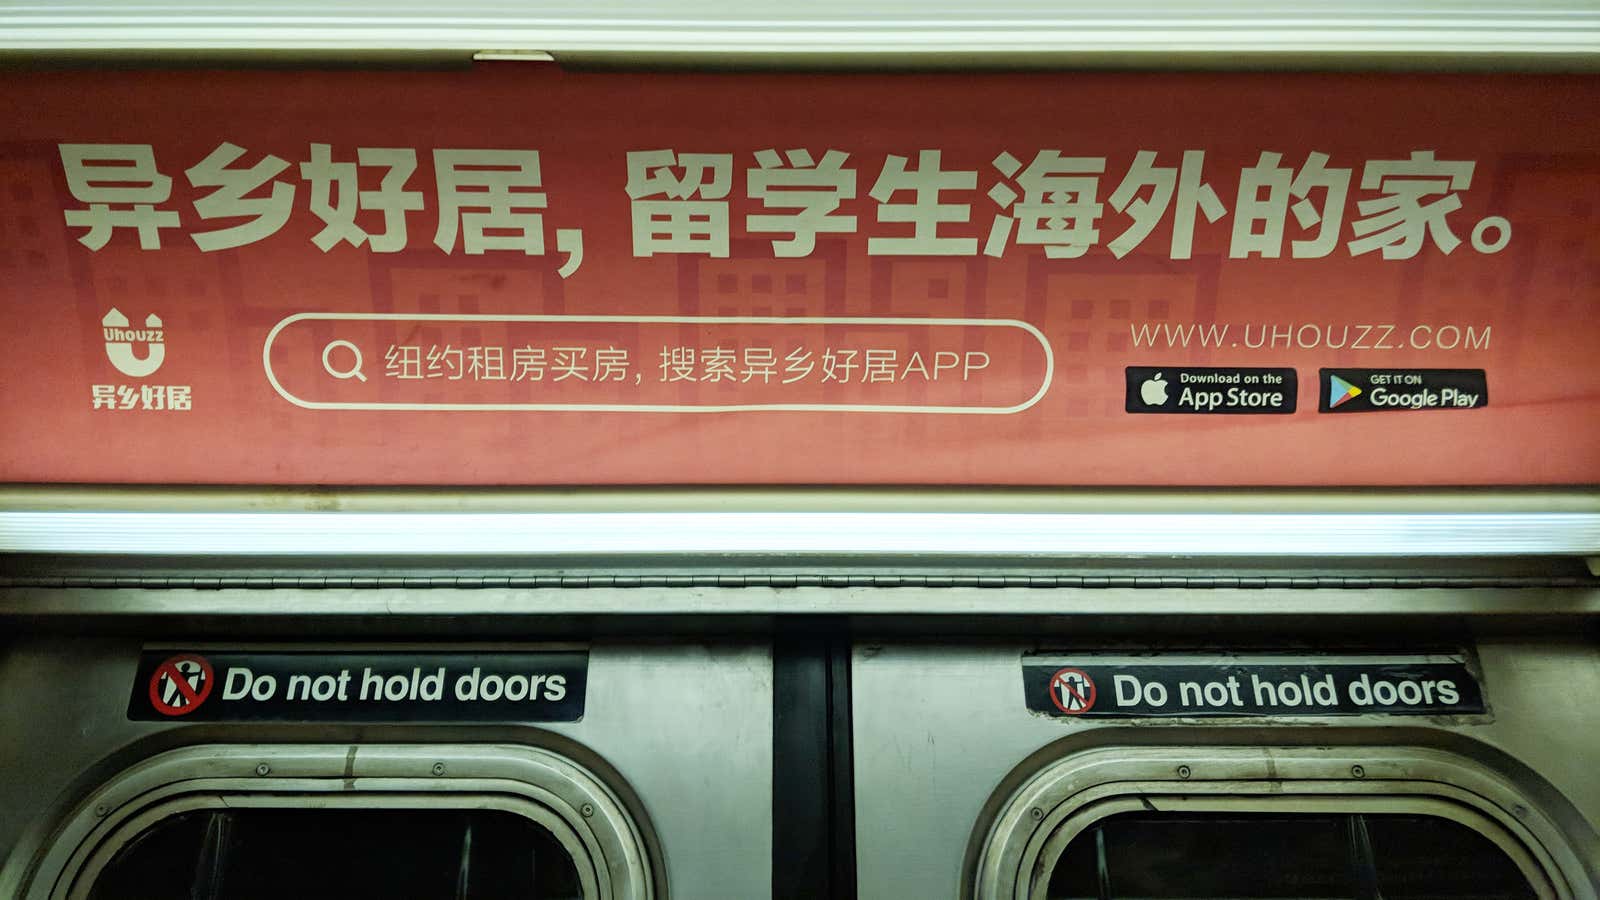 A housing app is running ads in New York City that only Chinese speakers can understand